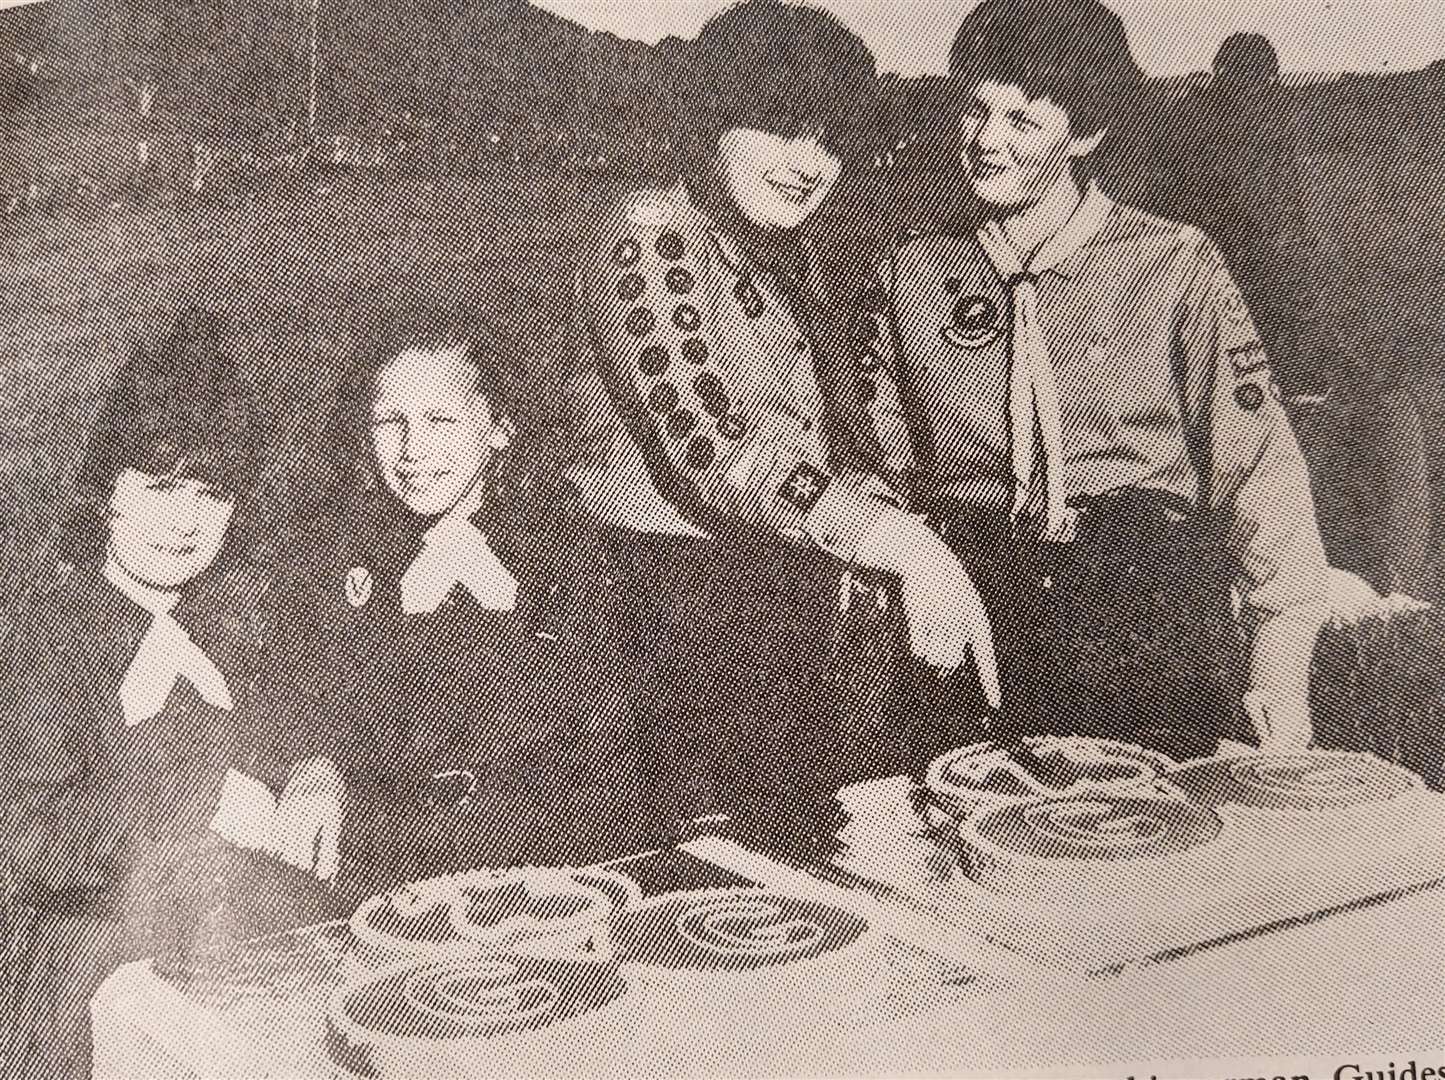 Fyvie and Rothienorman Guides celebrated their 75th anniversary with a camp fire. (Turriff Advertiser 1985)